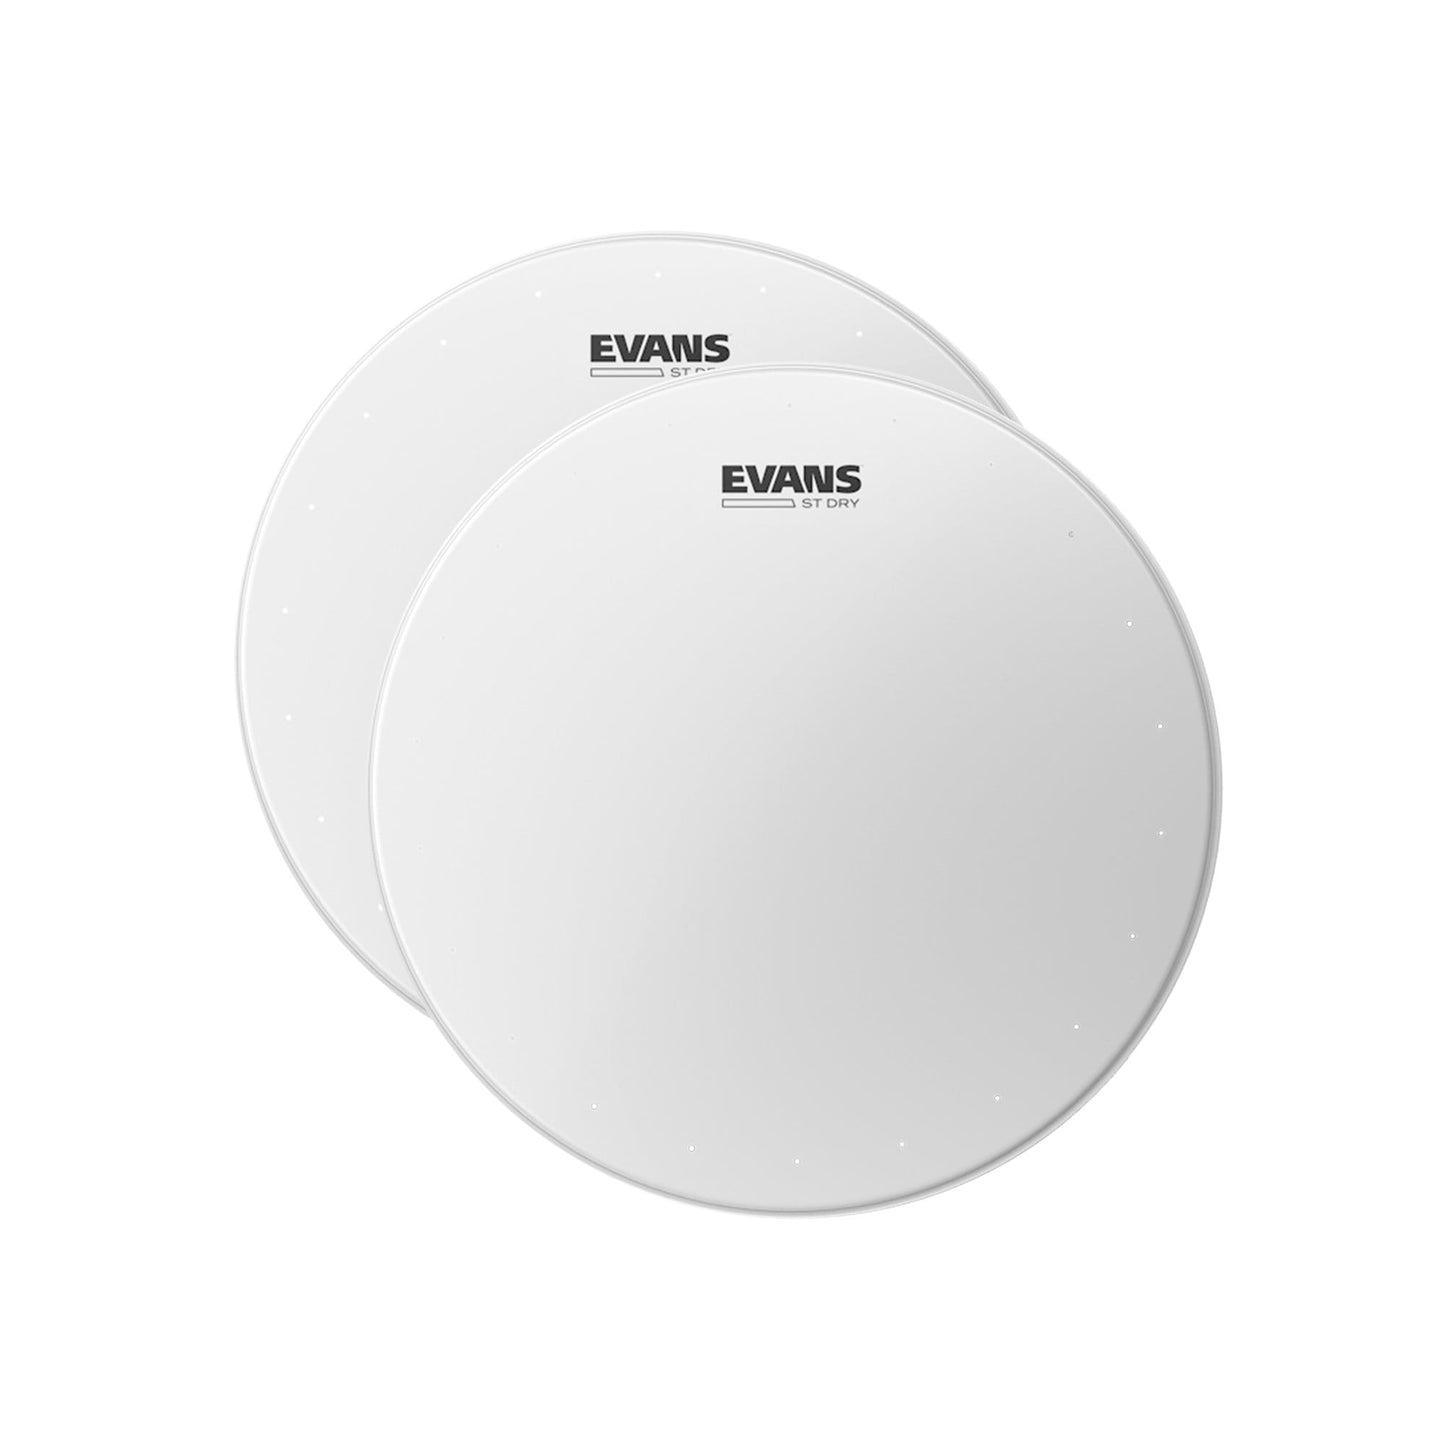 Evans 14" ST Dry Snare Drum Batter Head (2 Pack Bundle) Drums and Percussion / Parts and Accessories / Heads